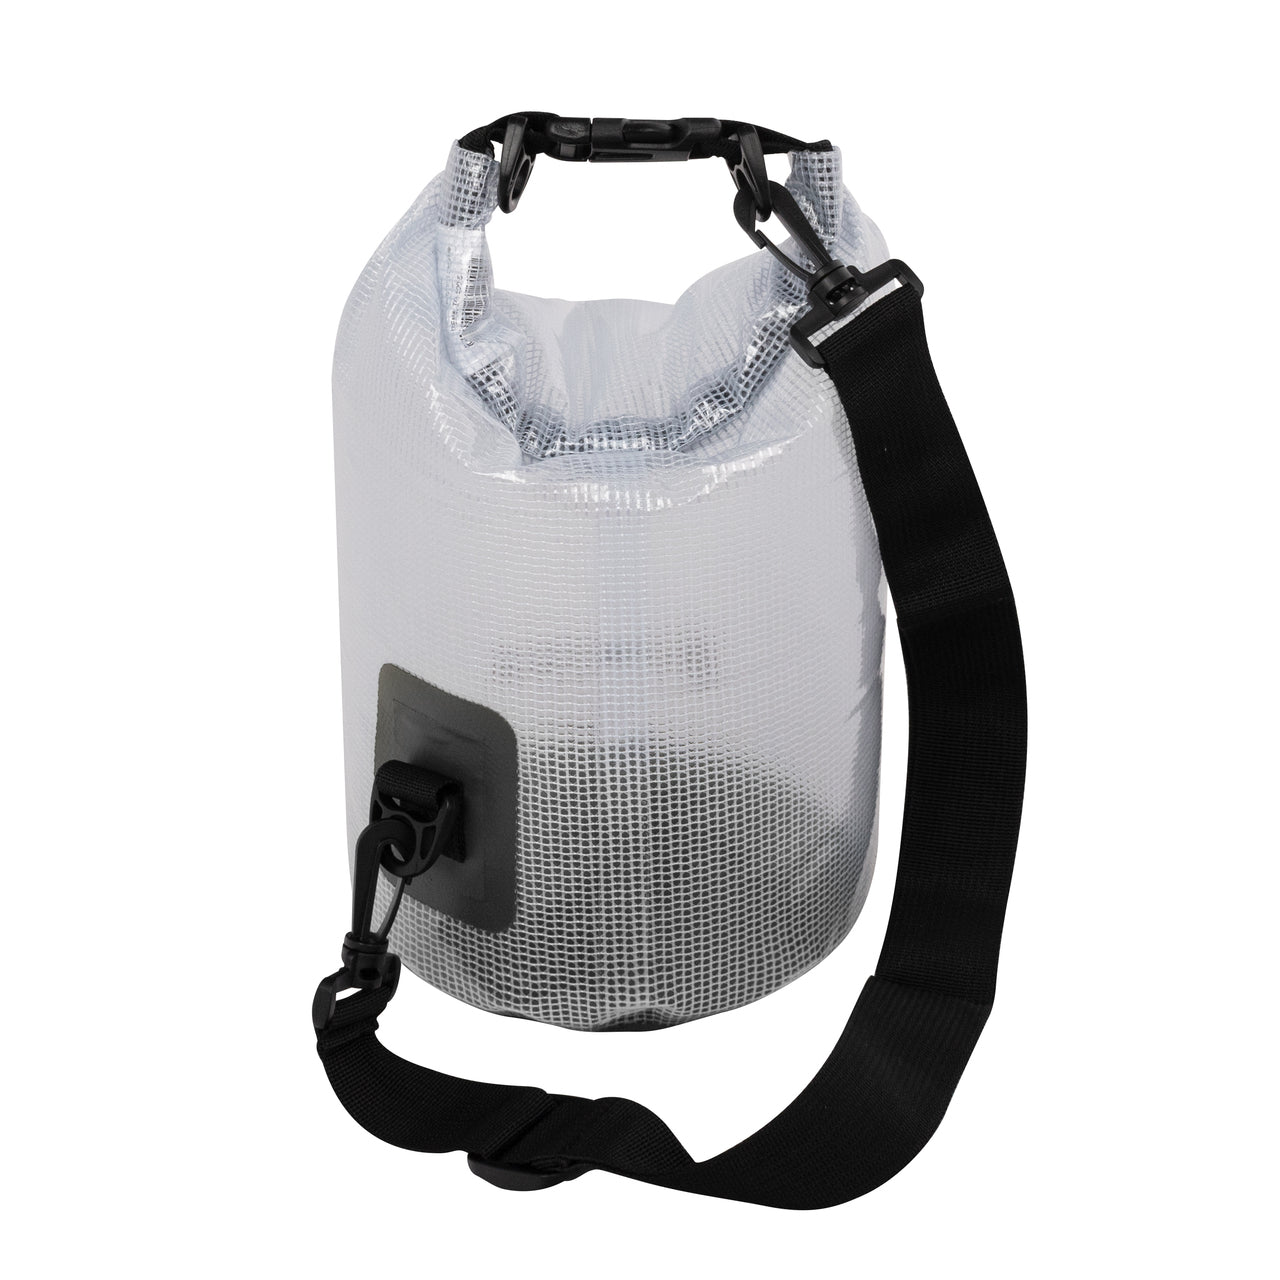 TrailGear 5 liter Heavy-Duty Transparent Dry Bag in the black variation.